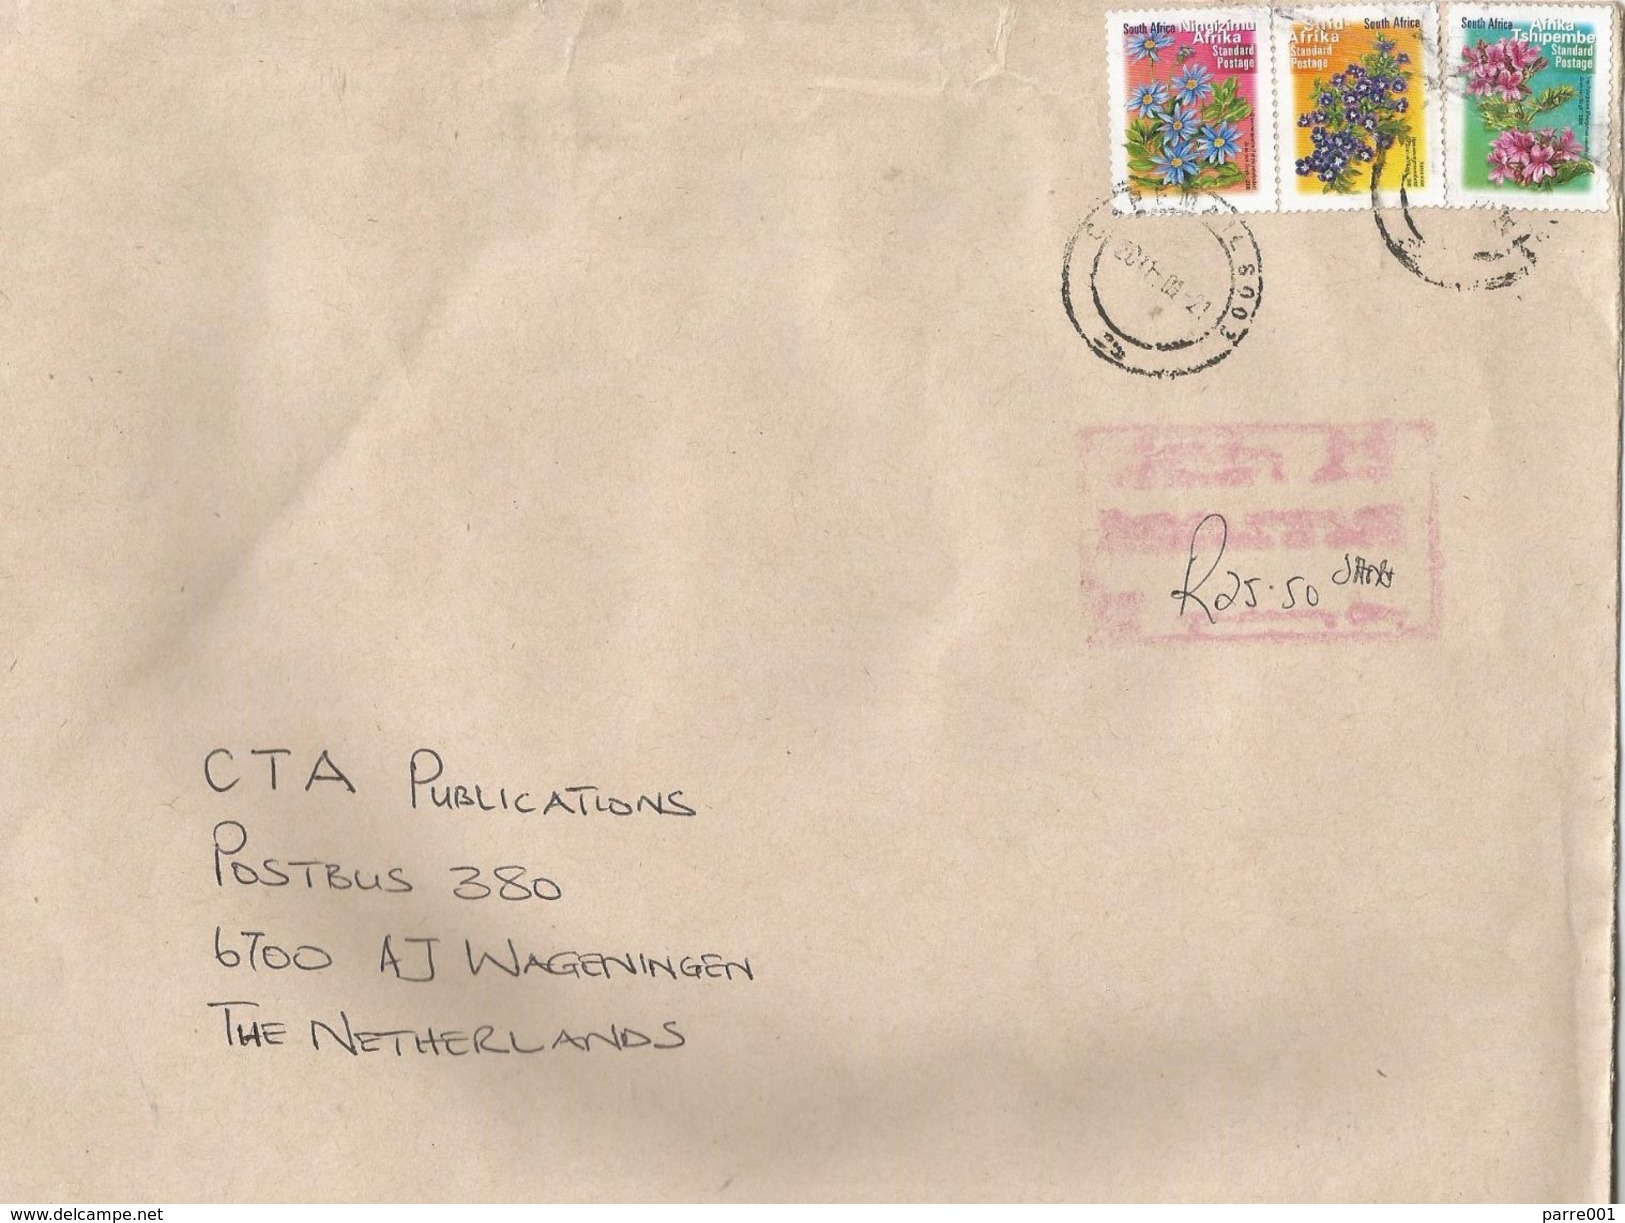 South Africa 2011 Cape Flowers Postage Due Charge Cover - Strafport